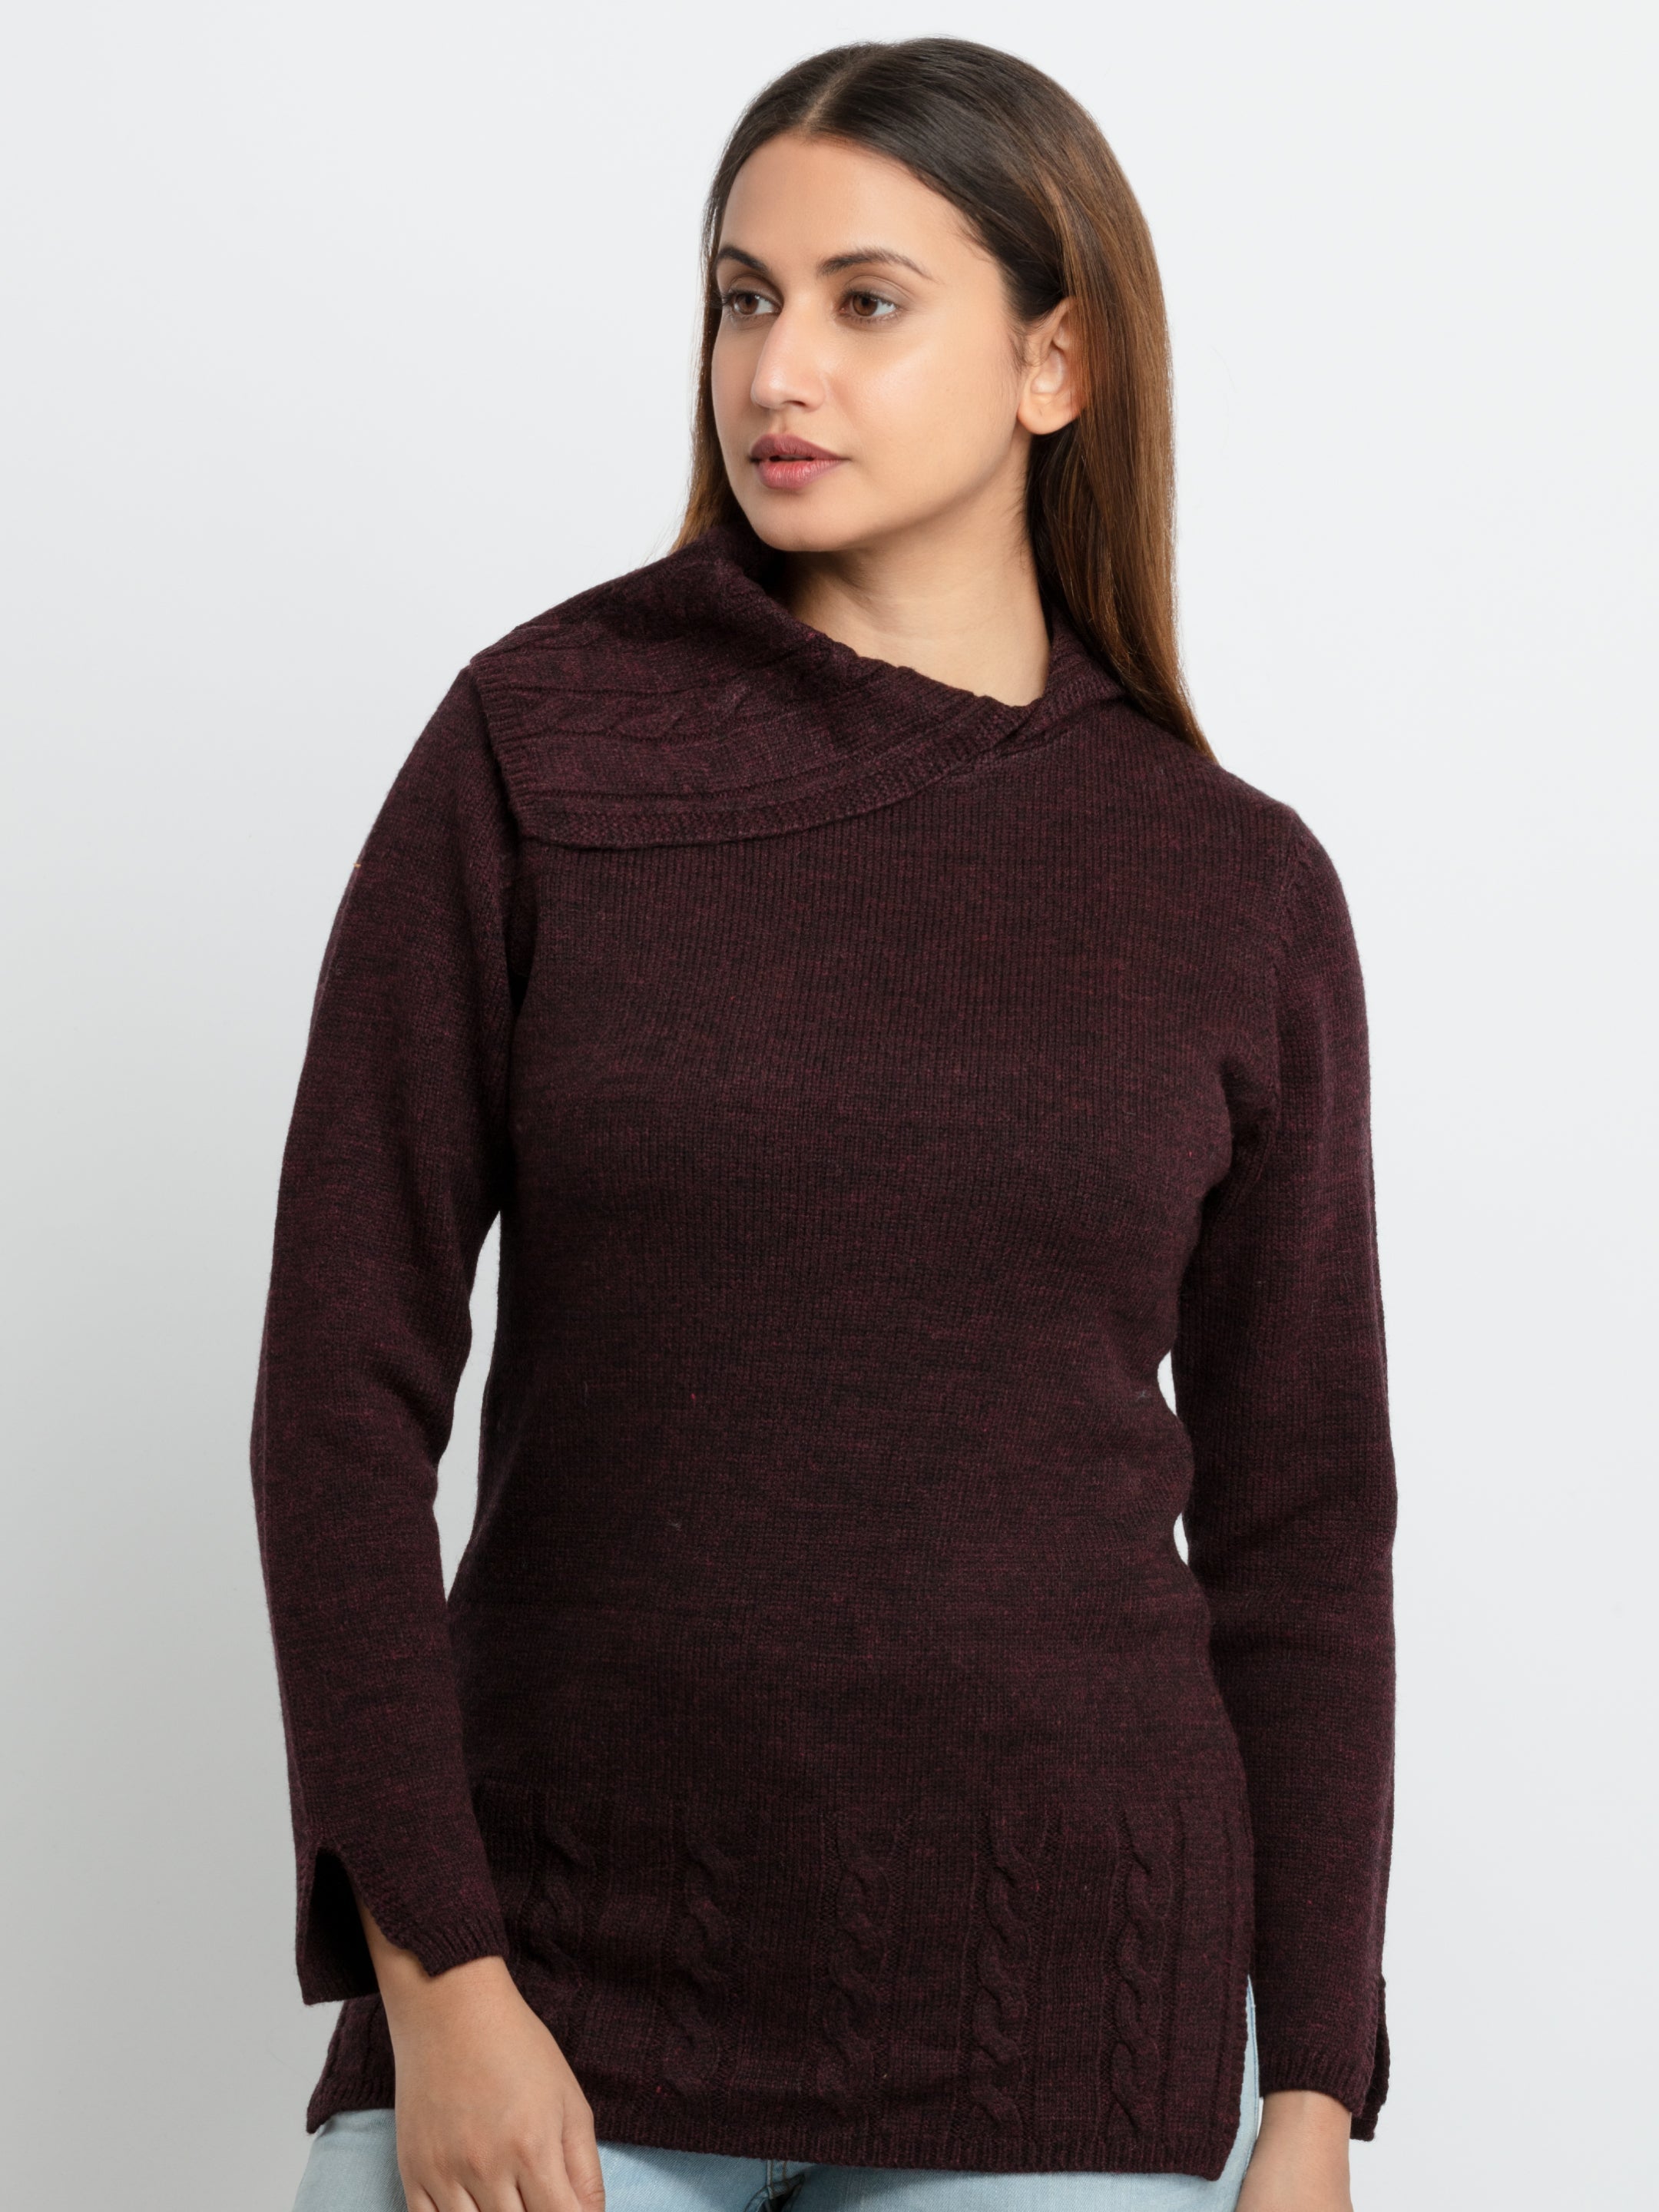 Womens Knitted Cowl Neck Sweater - S / Maroon / SQW-FK-22982-Maroon